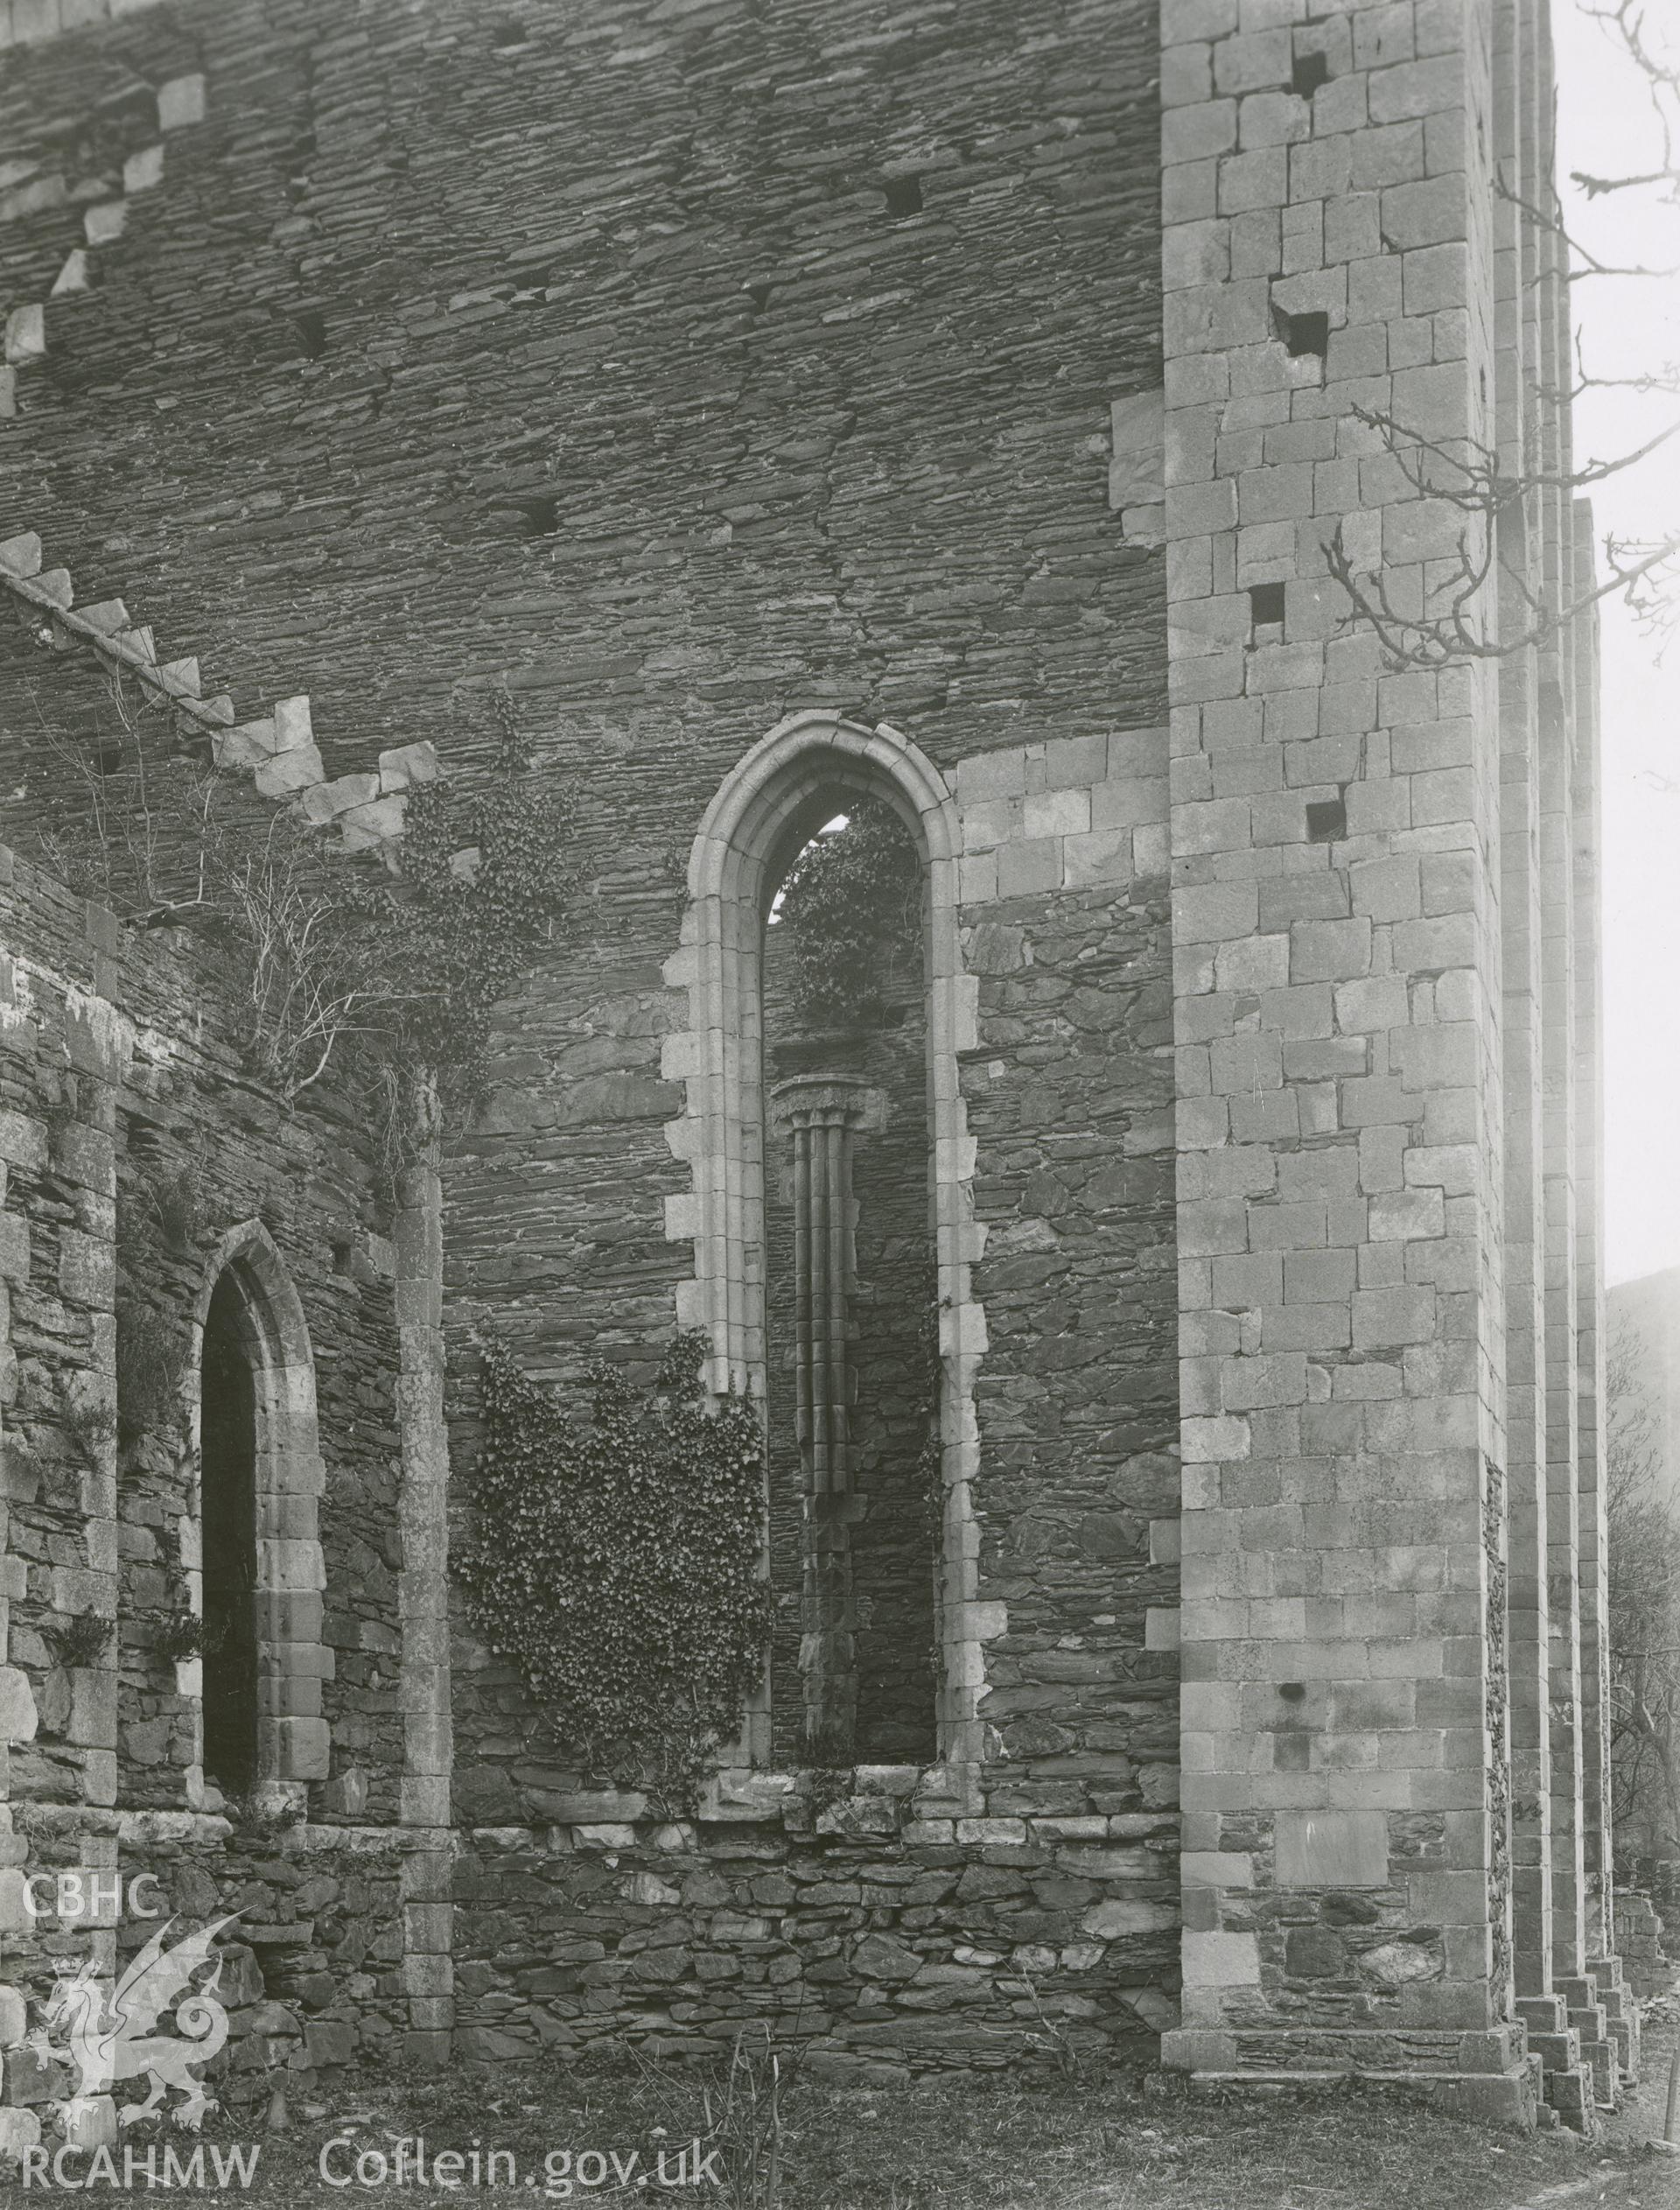 Digitised copy of a black and white photograph showing door S.E. corner at Valle Crucis Abbey, taken by F.H. Crossley, 1949. Copied from print as negative held by NMR England (Historic England).